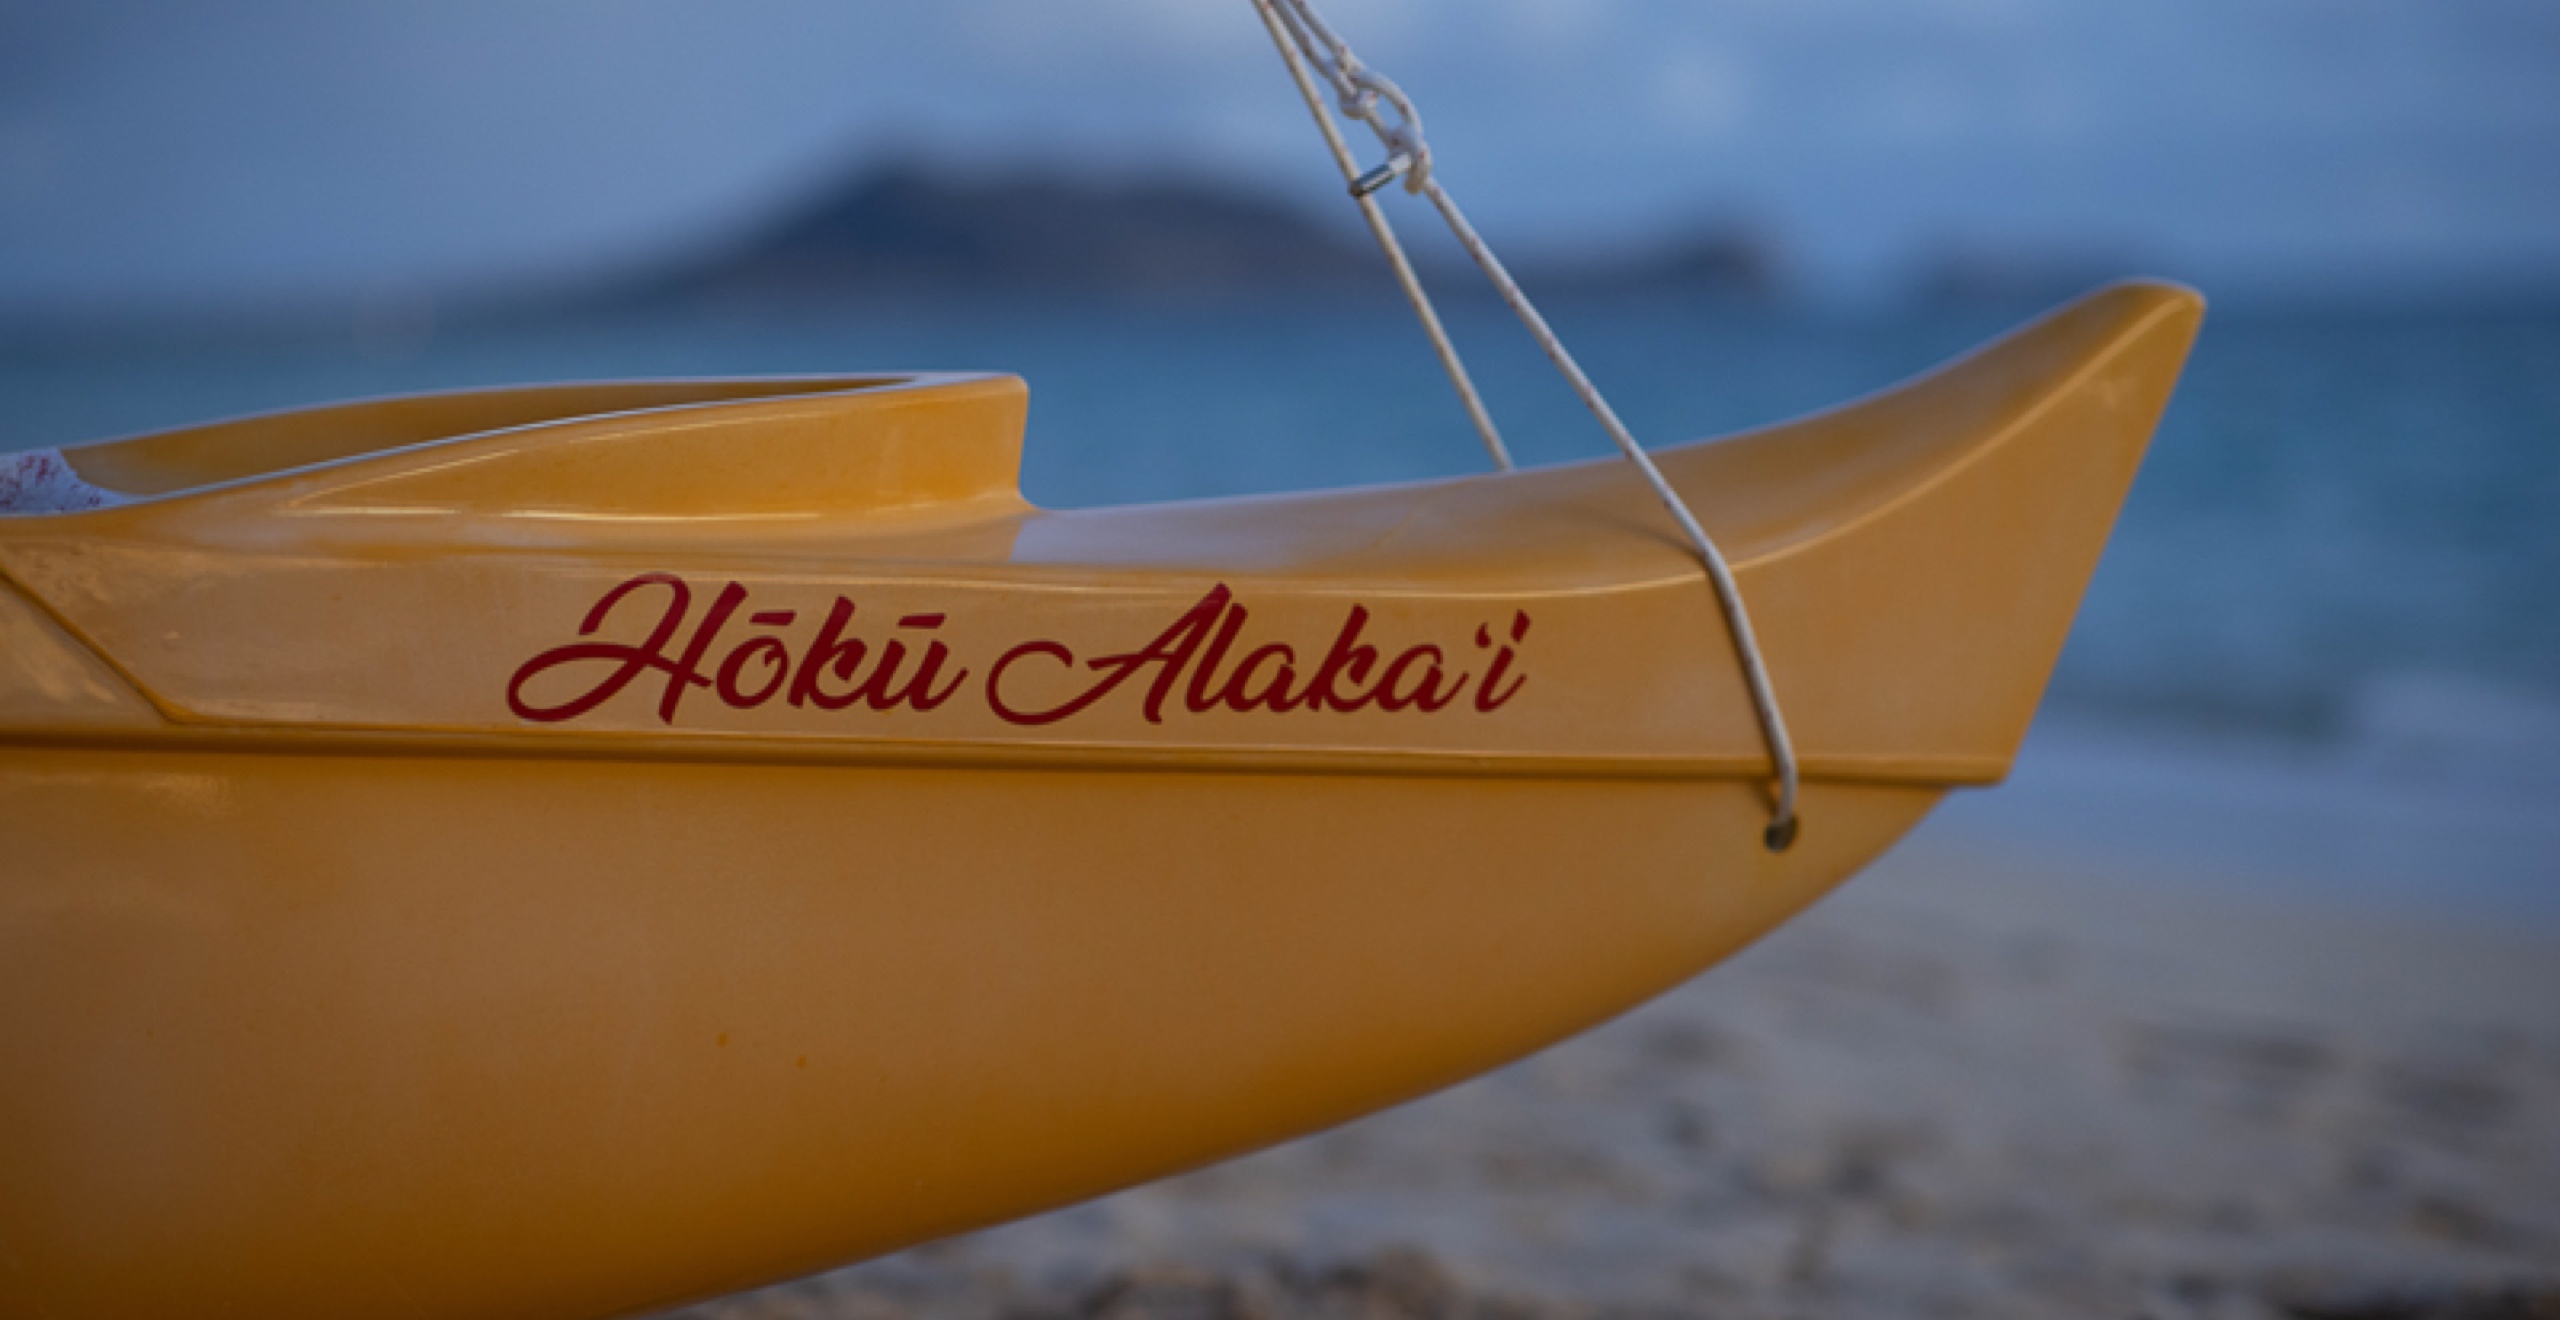 Both Hopena’s own boat and the famous Hōkūleʻa use the Hawaiian word <em>hōkū</em>, which translates to “star”—a reference to the ancient practice of celestial navigation that is fundamental to traditional Polynesian sailing. 